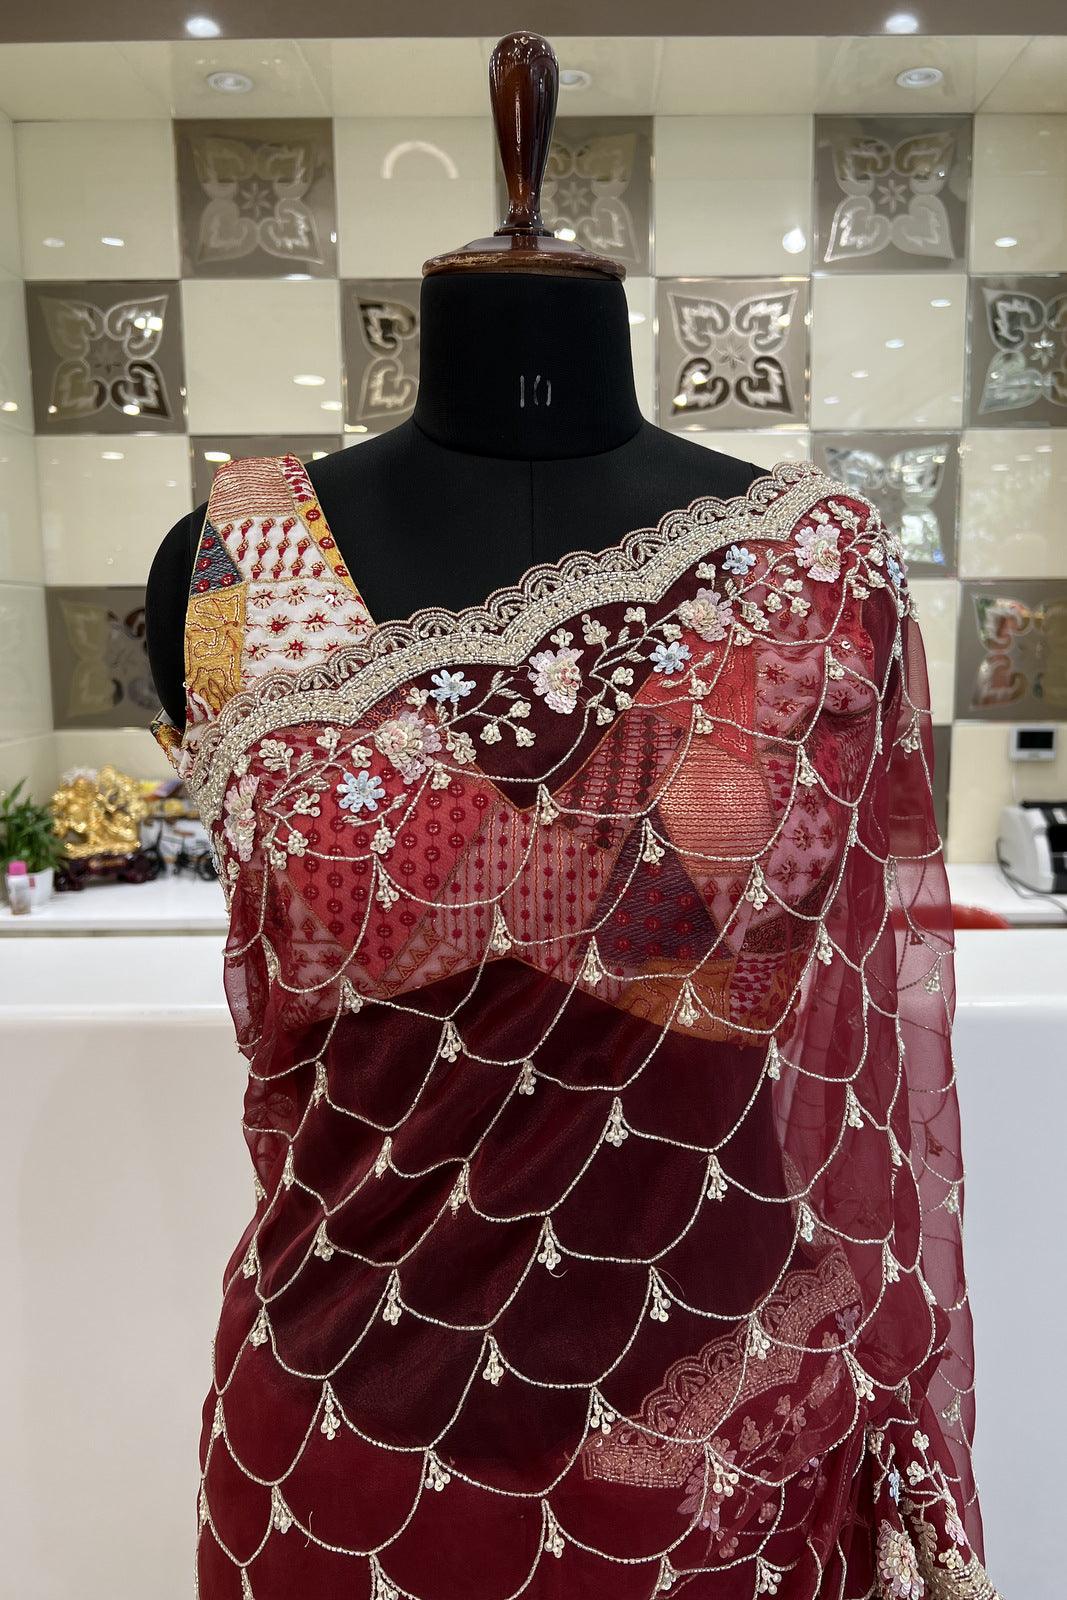 Maroon Sequins, Beads and Pearl work Saree with Matching Unstitched Designer Blouse - Seasons Chennai